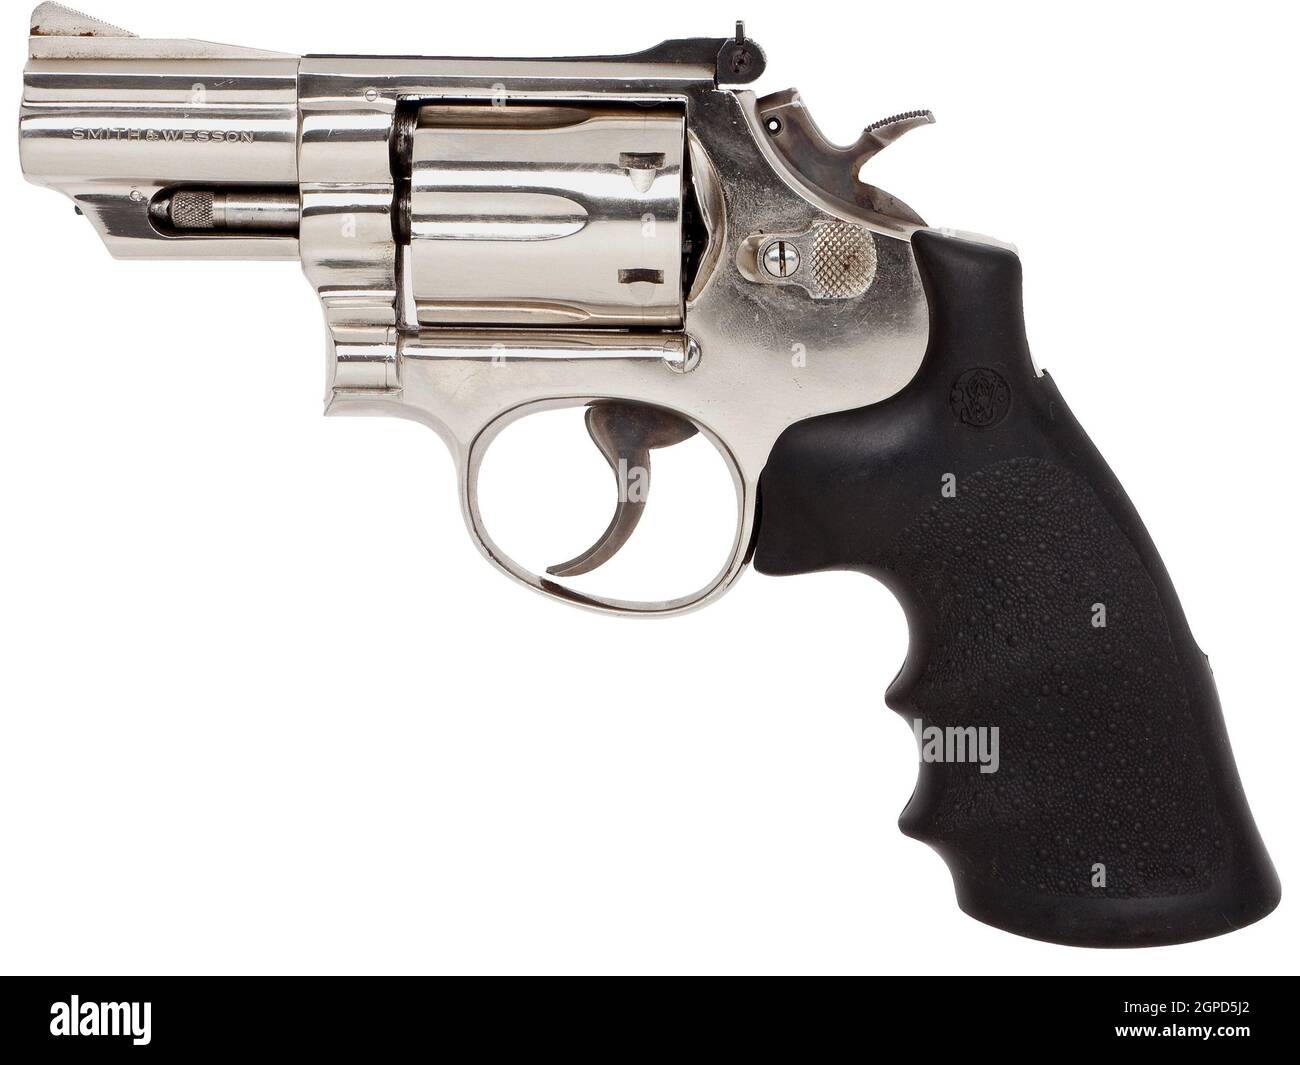 Smith & Wesson Model 19-3 Double Action Revolver Stock Photo